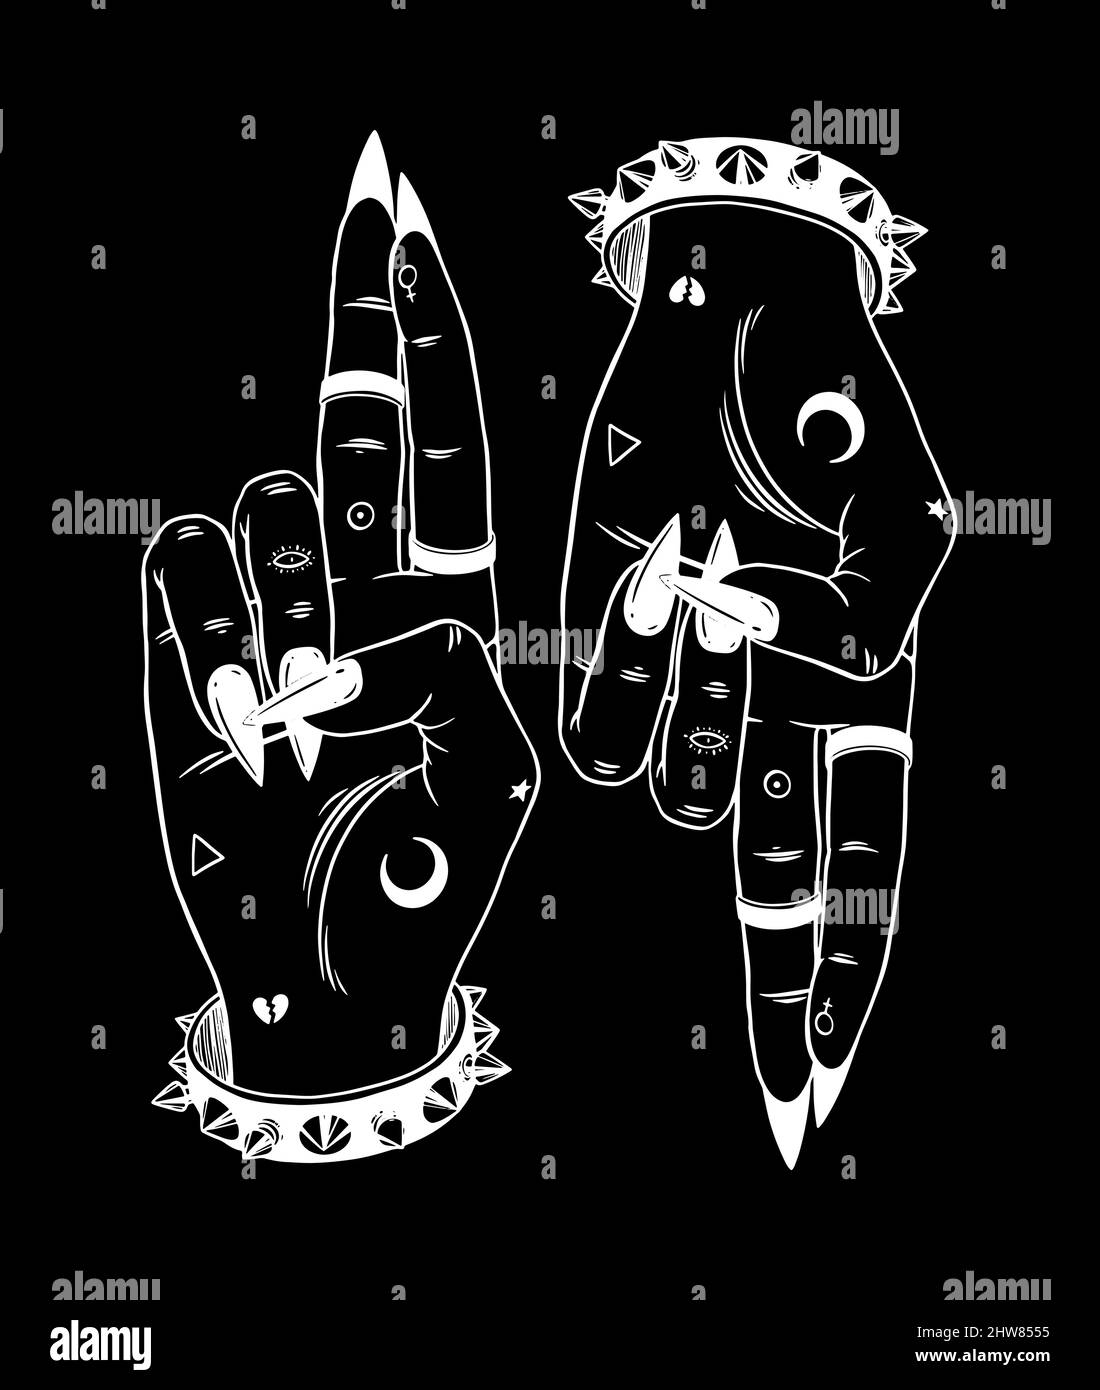 As above so below. Devil's hands | Alchemy Symbol Occult witchy Hermetic | Dark gothic magic art | Satan Lucifer Baphomet Stock Vector